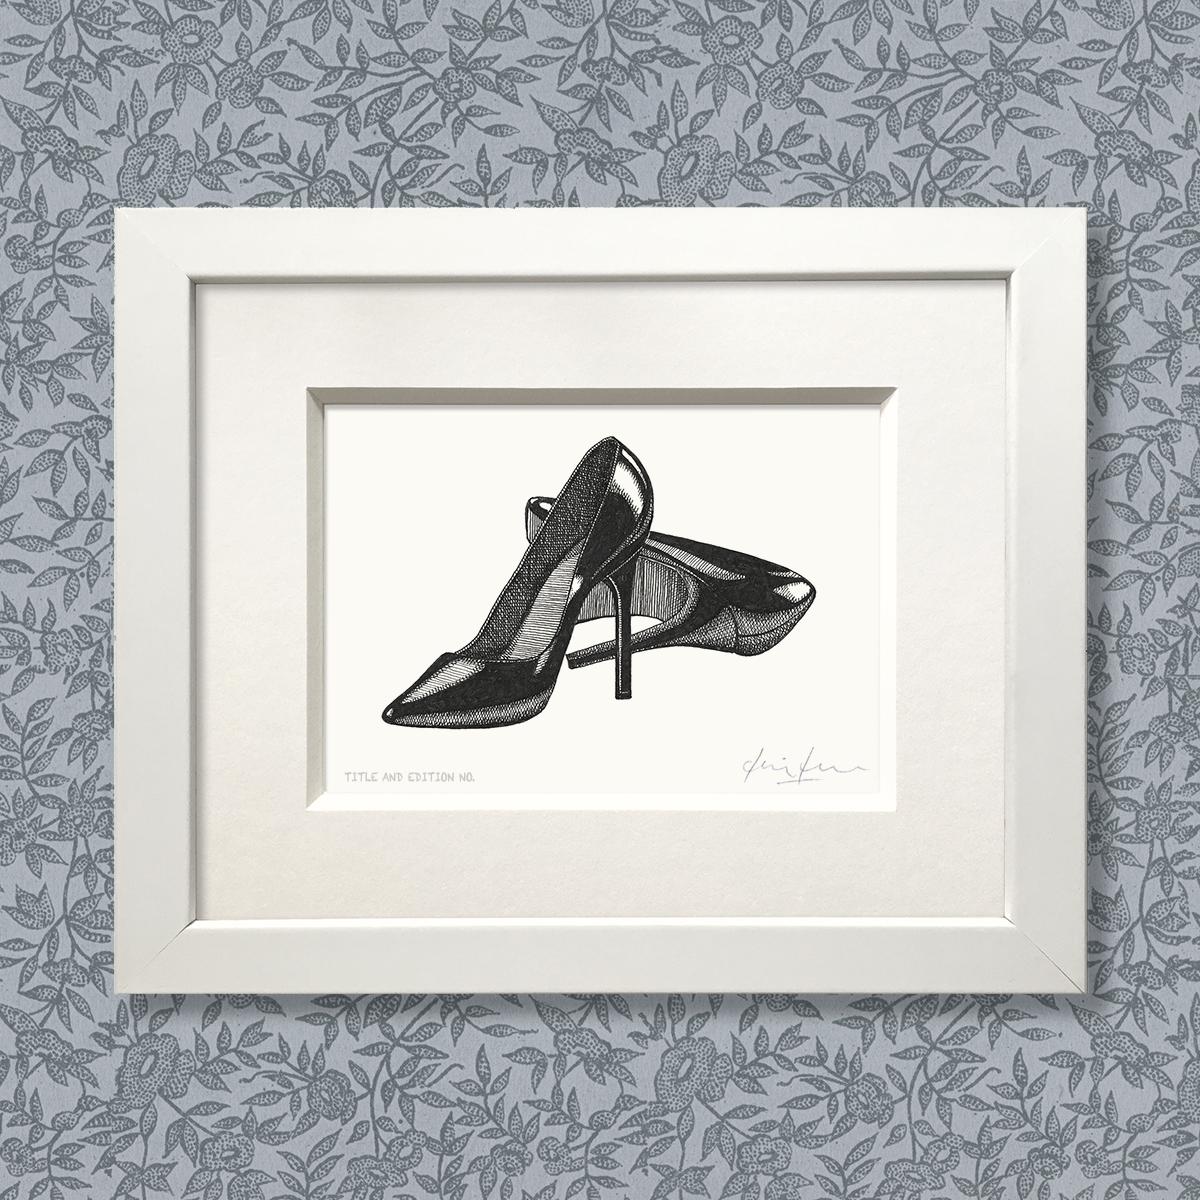 Limited edition print from pen and ink drawing of a pair of stiletto heels in a white frame